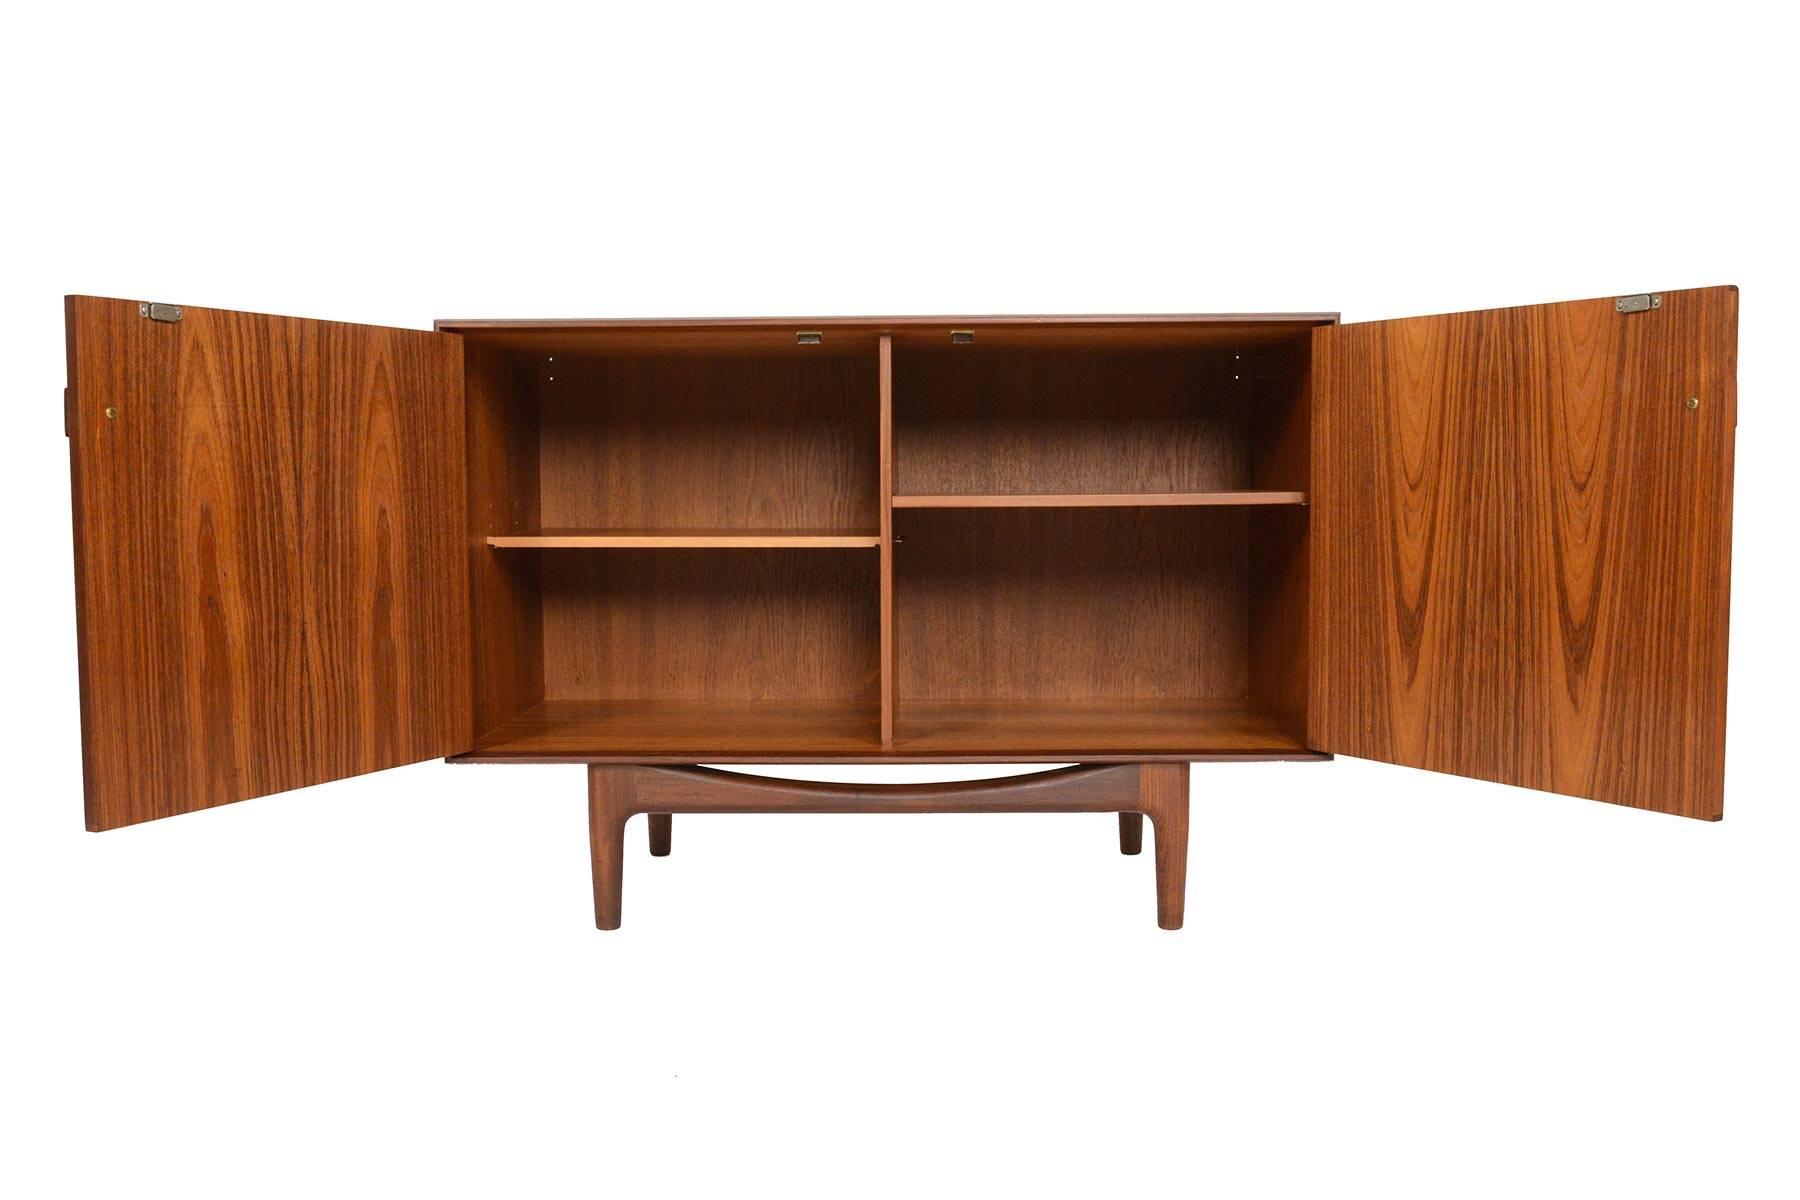 This small midcentury teak credenza was designed by Ib Kofod-Larsen for G-Plan in 1961 for the Danish range. Crafted in teak and afrormosia with handsomely refined lines, two wide doors open to reveal two bays with adjustable shelving. Finished on